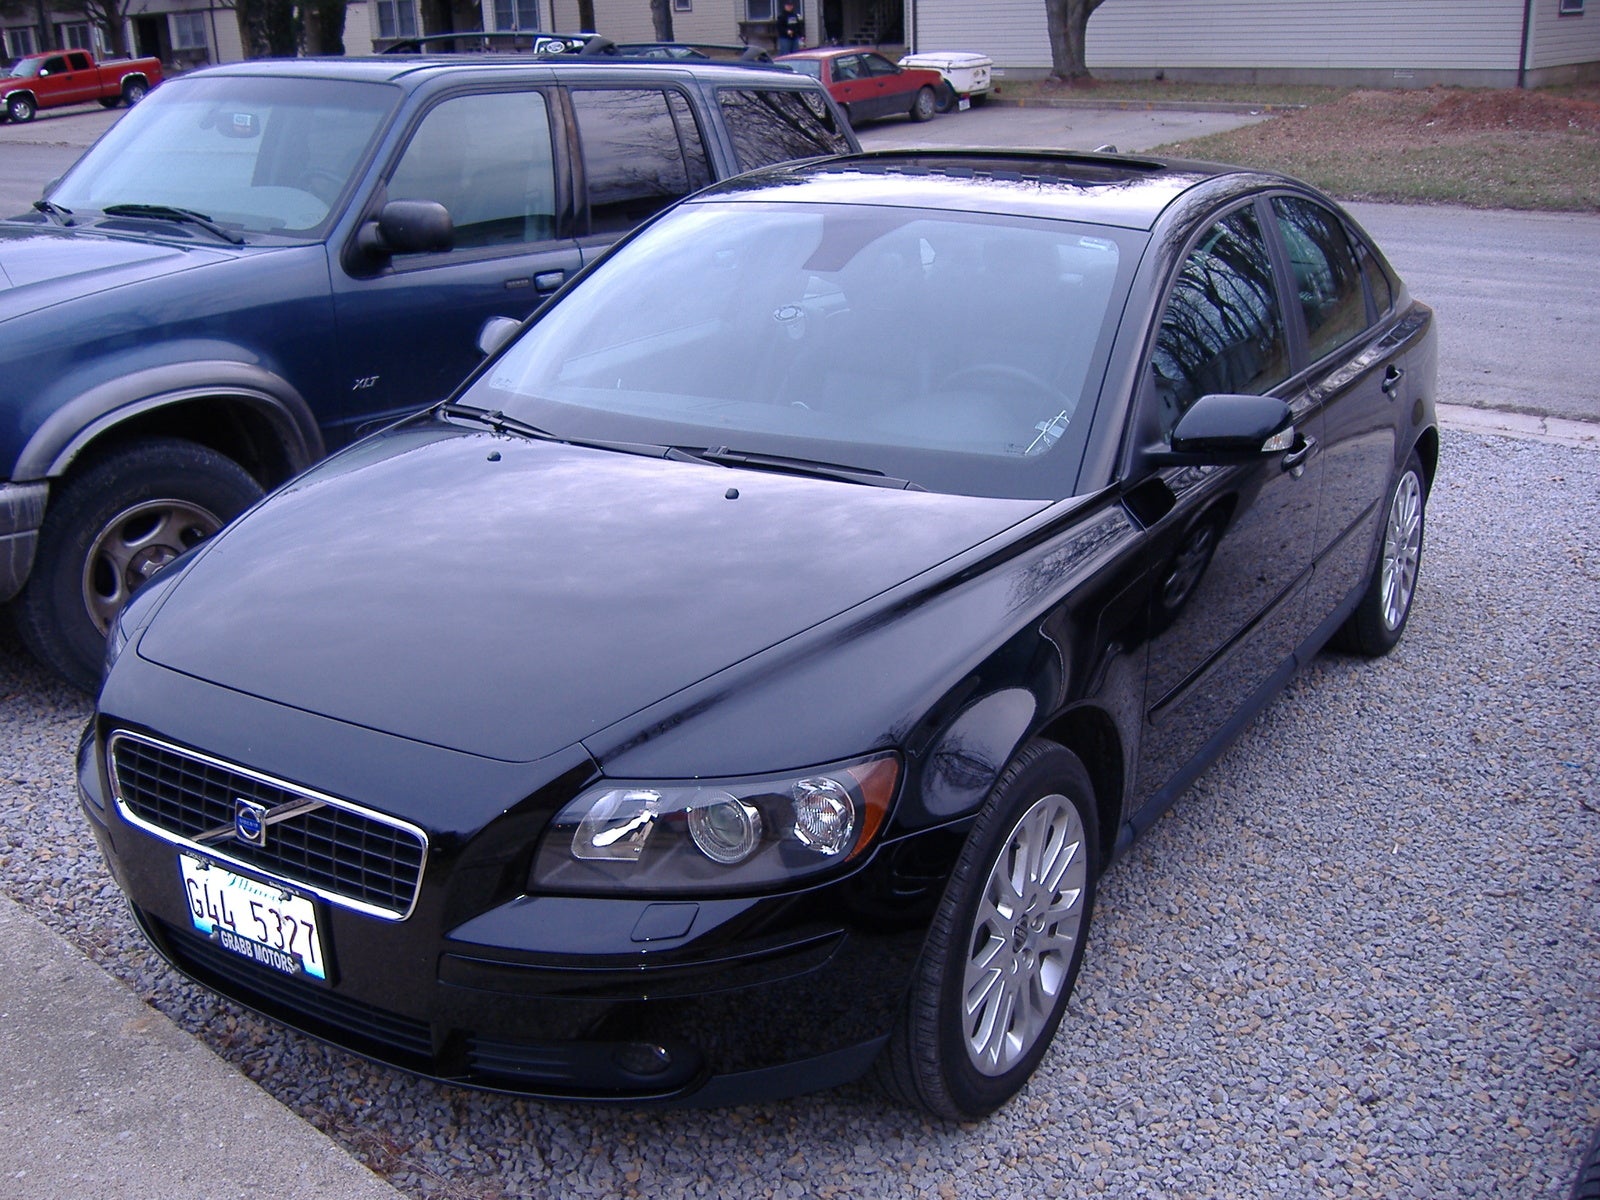  Volvo  on 2005 Volvo S40   Pictures   2005 Volvo S40 T5 Picture   Cargurus